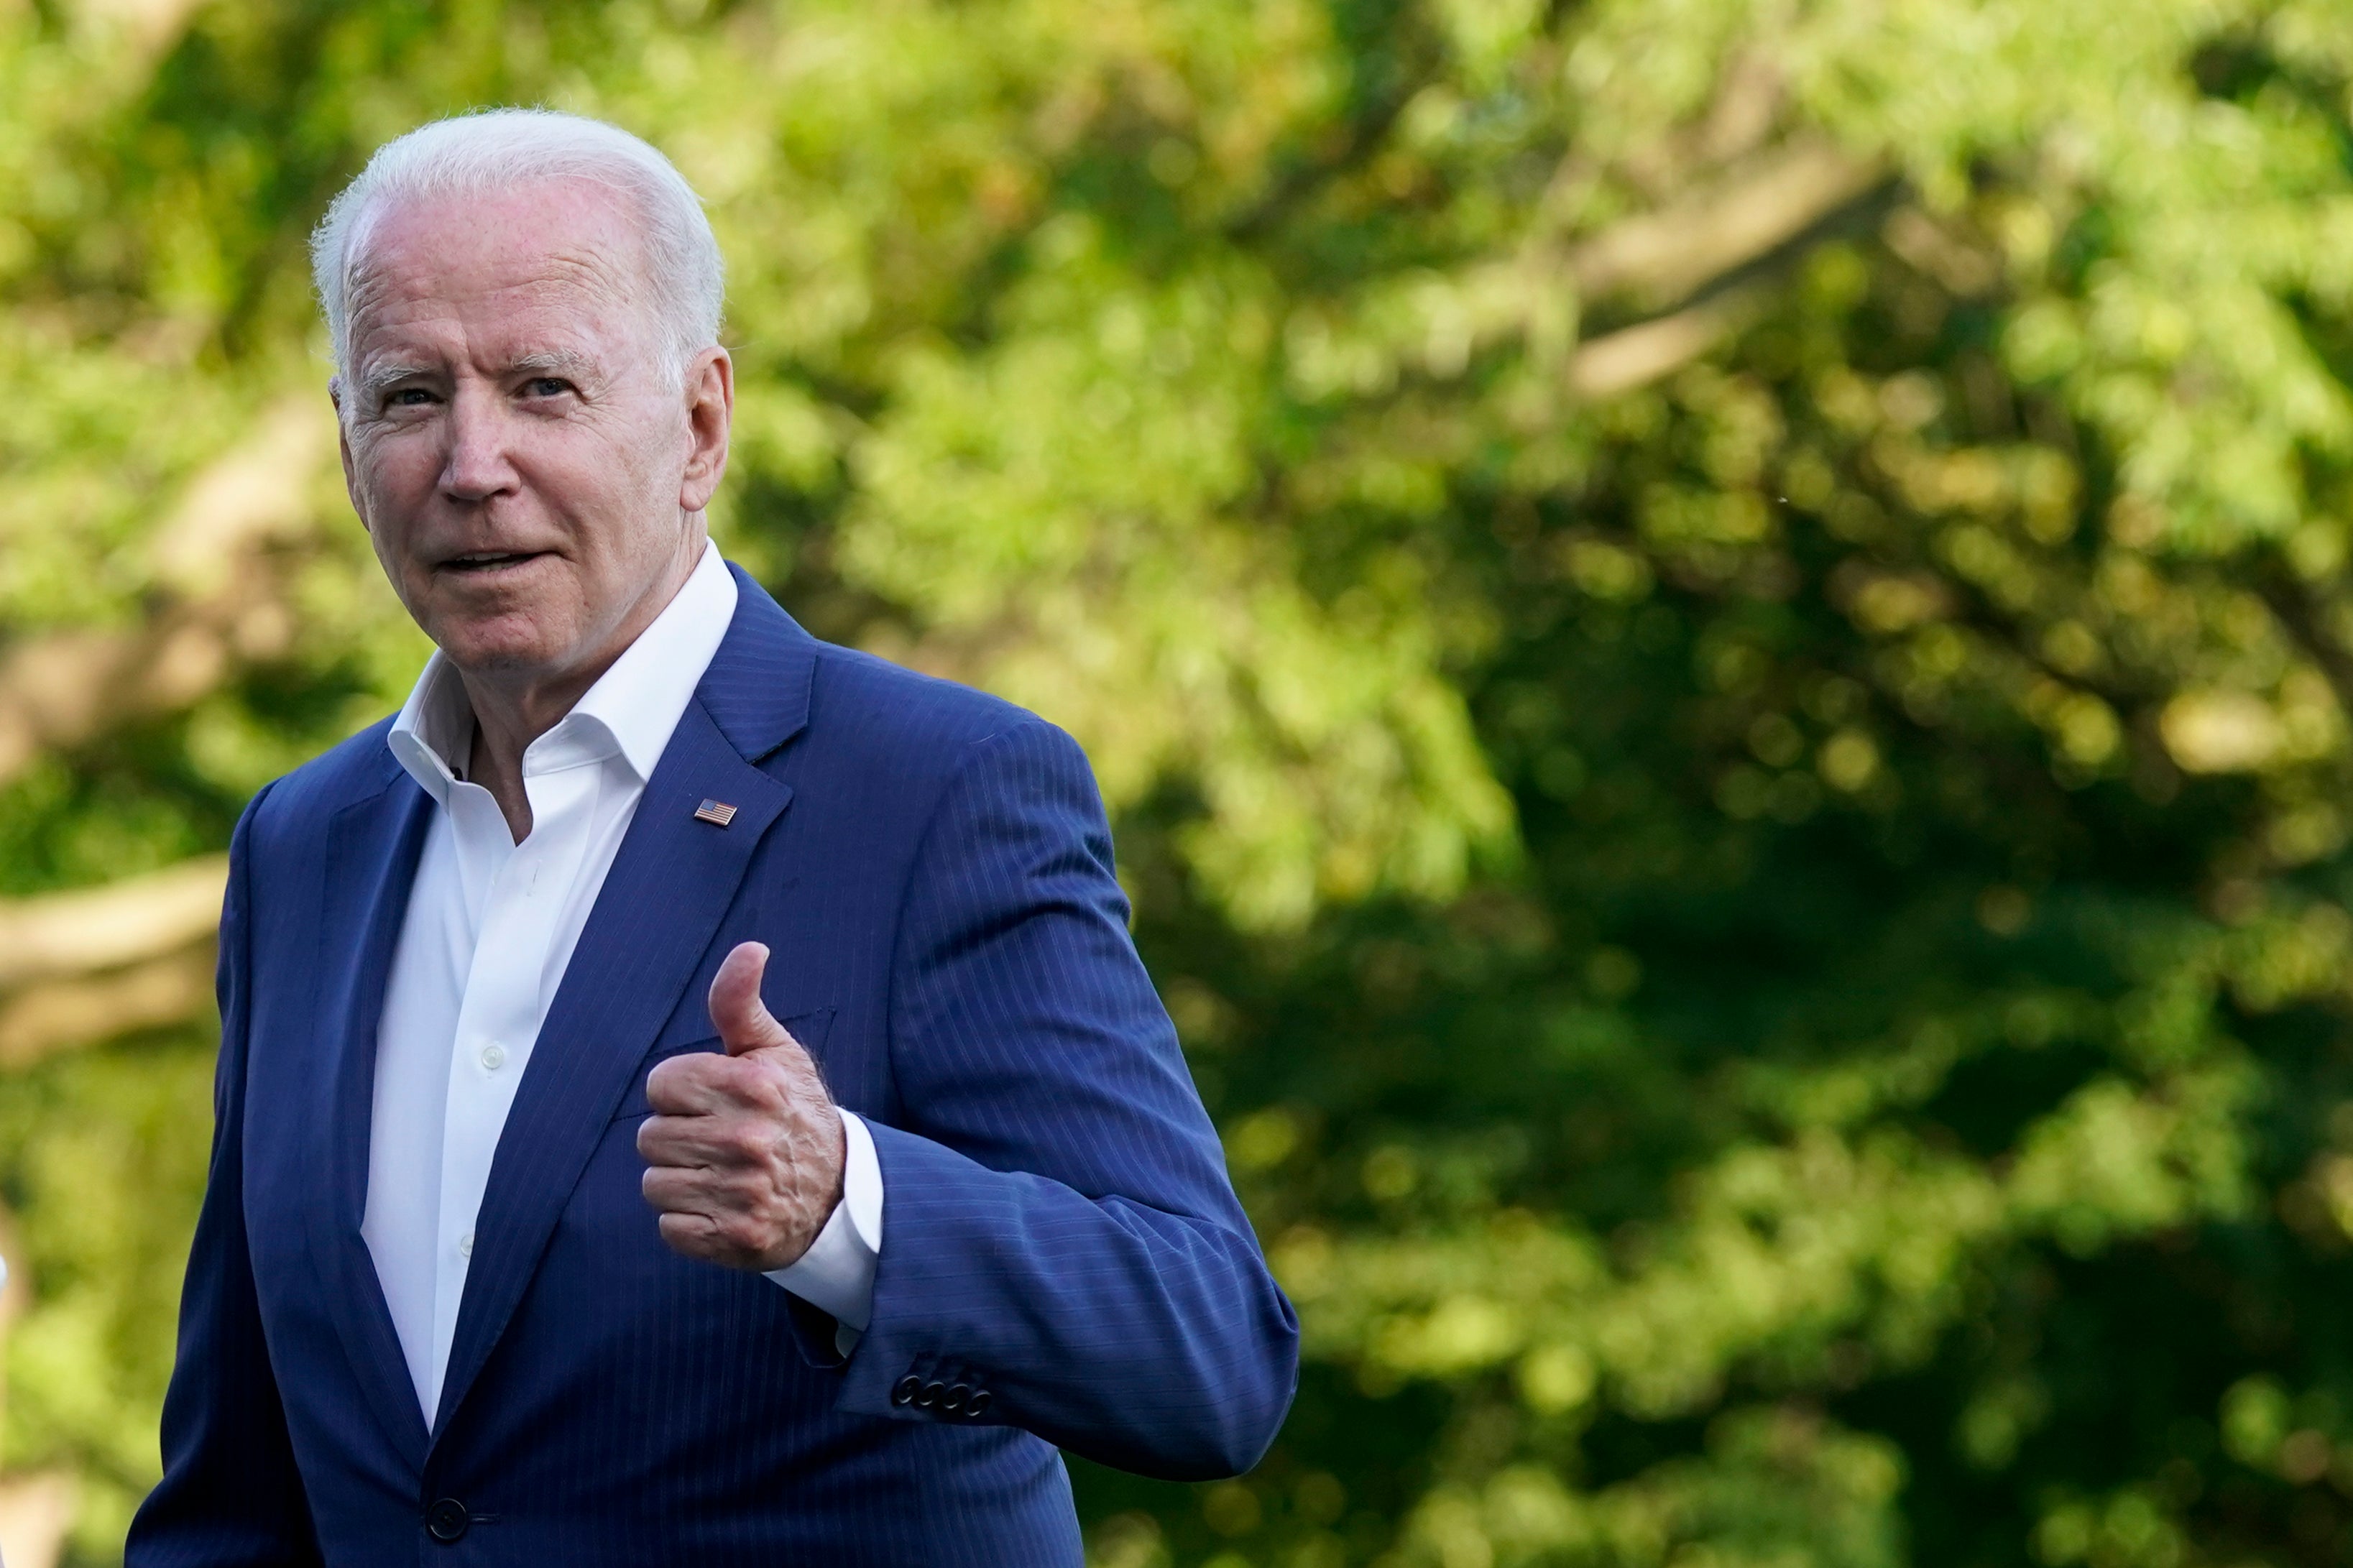 President Joe Biden gestures as he walks on the South Lawn of the White House on Sunday